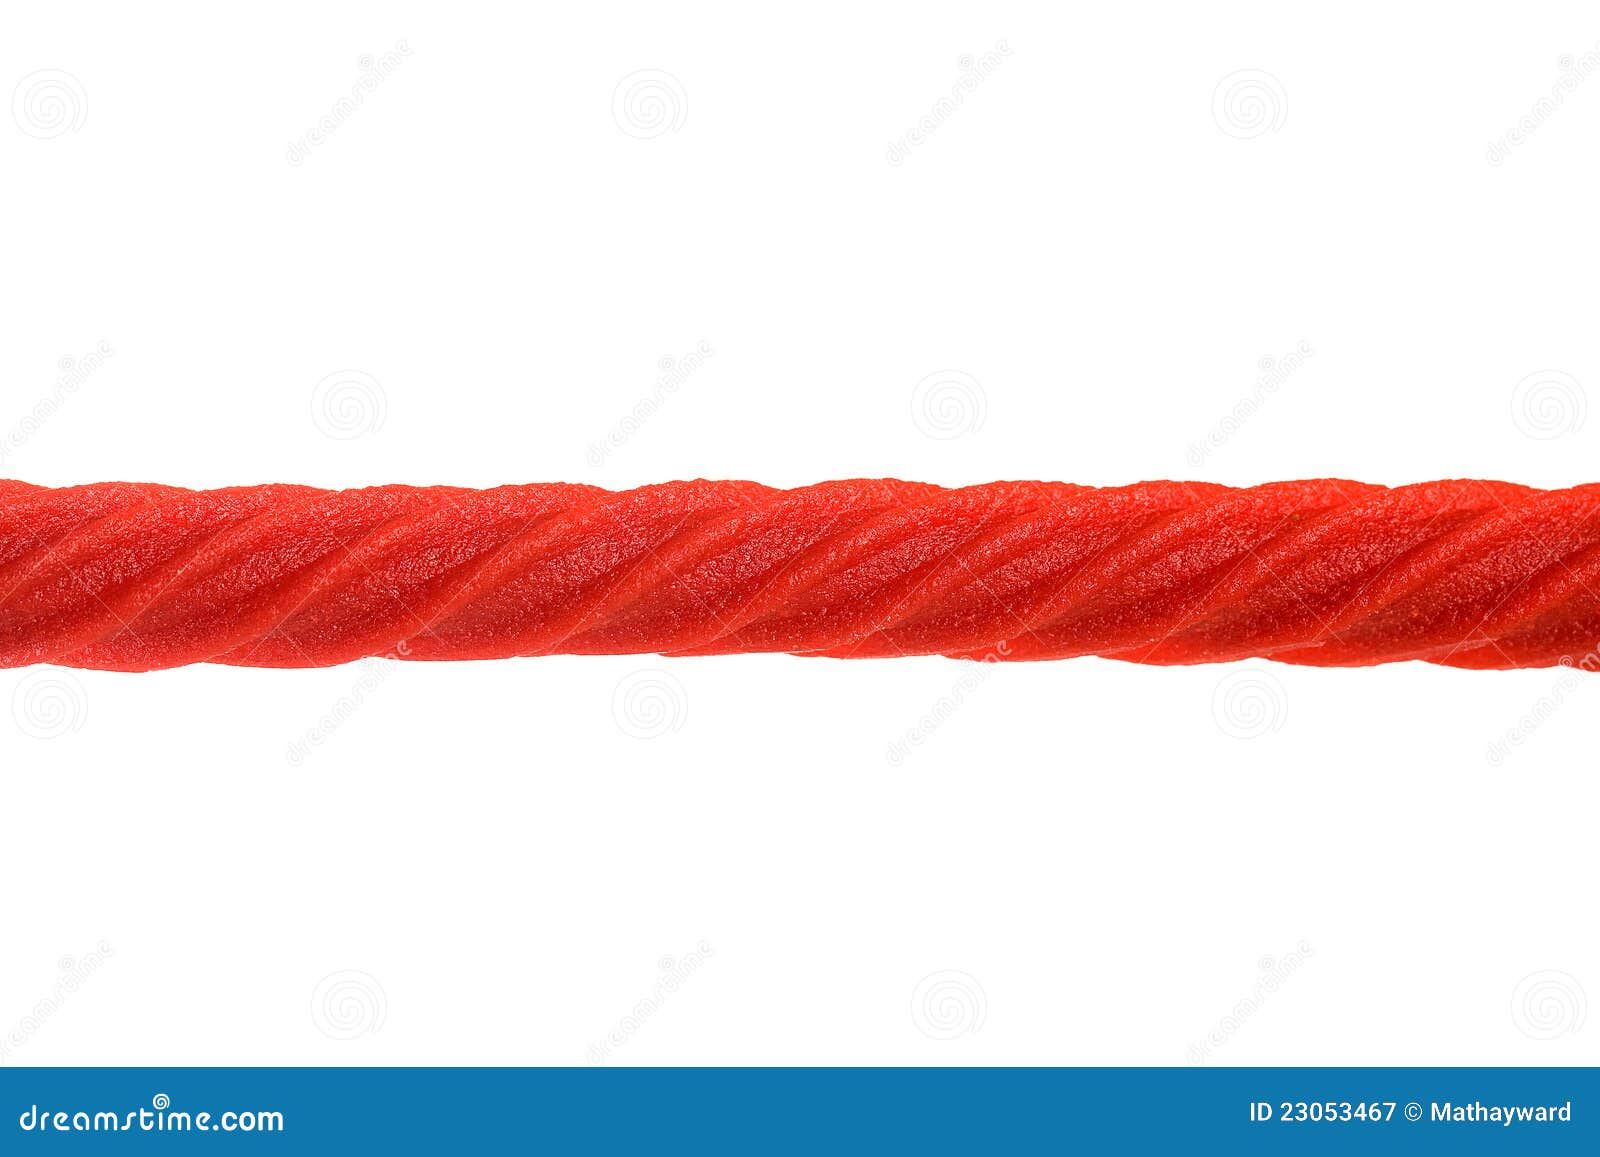 Red Licorice Rope stock image. Image of diet, candy, sugar - 23053467